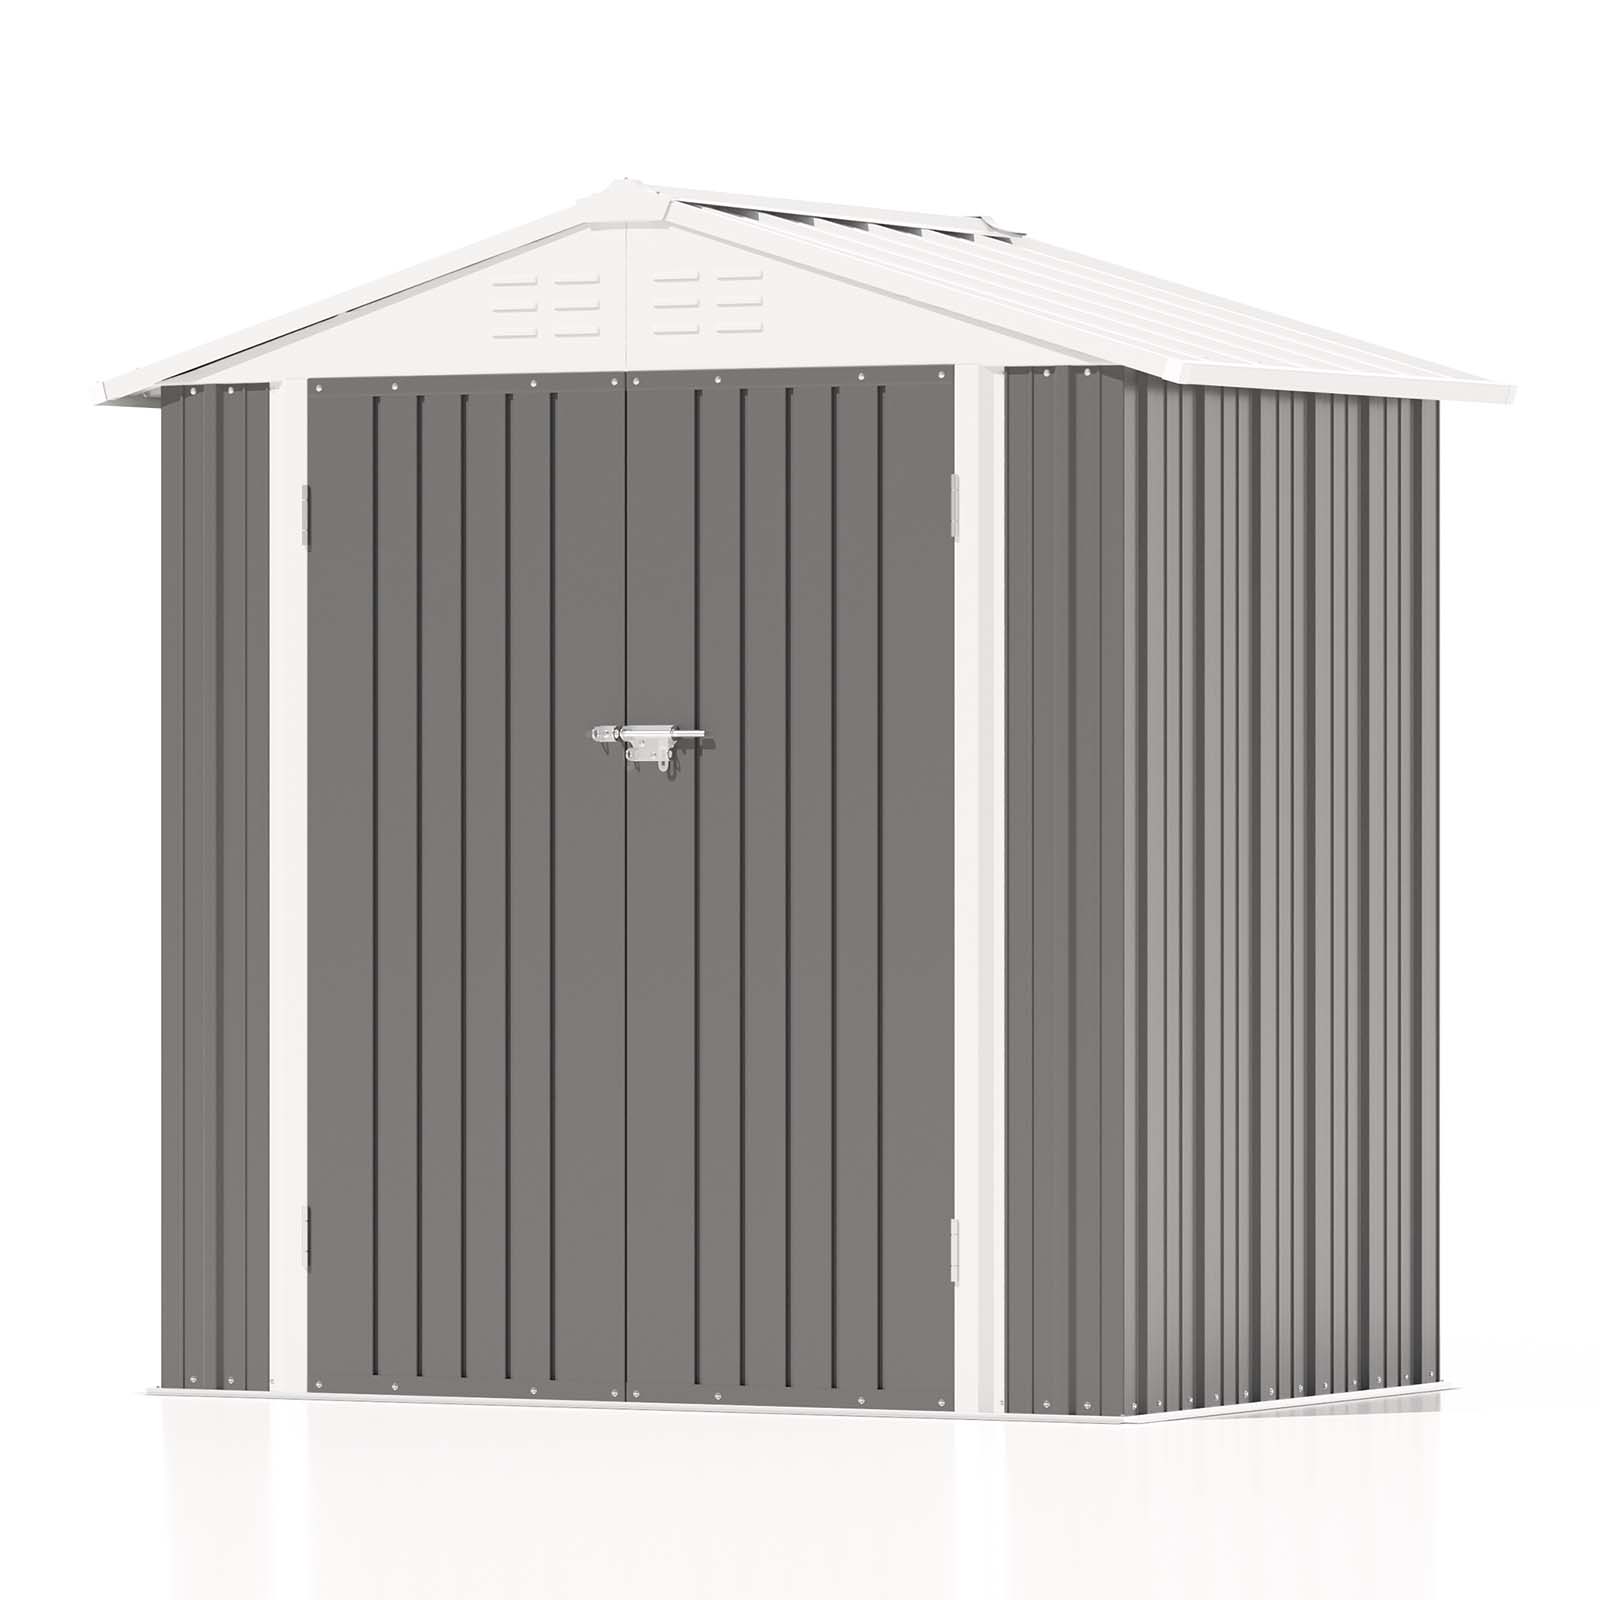 Patiowell 6x4 Metal Shed With Peak Roof-Cool Gray